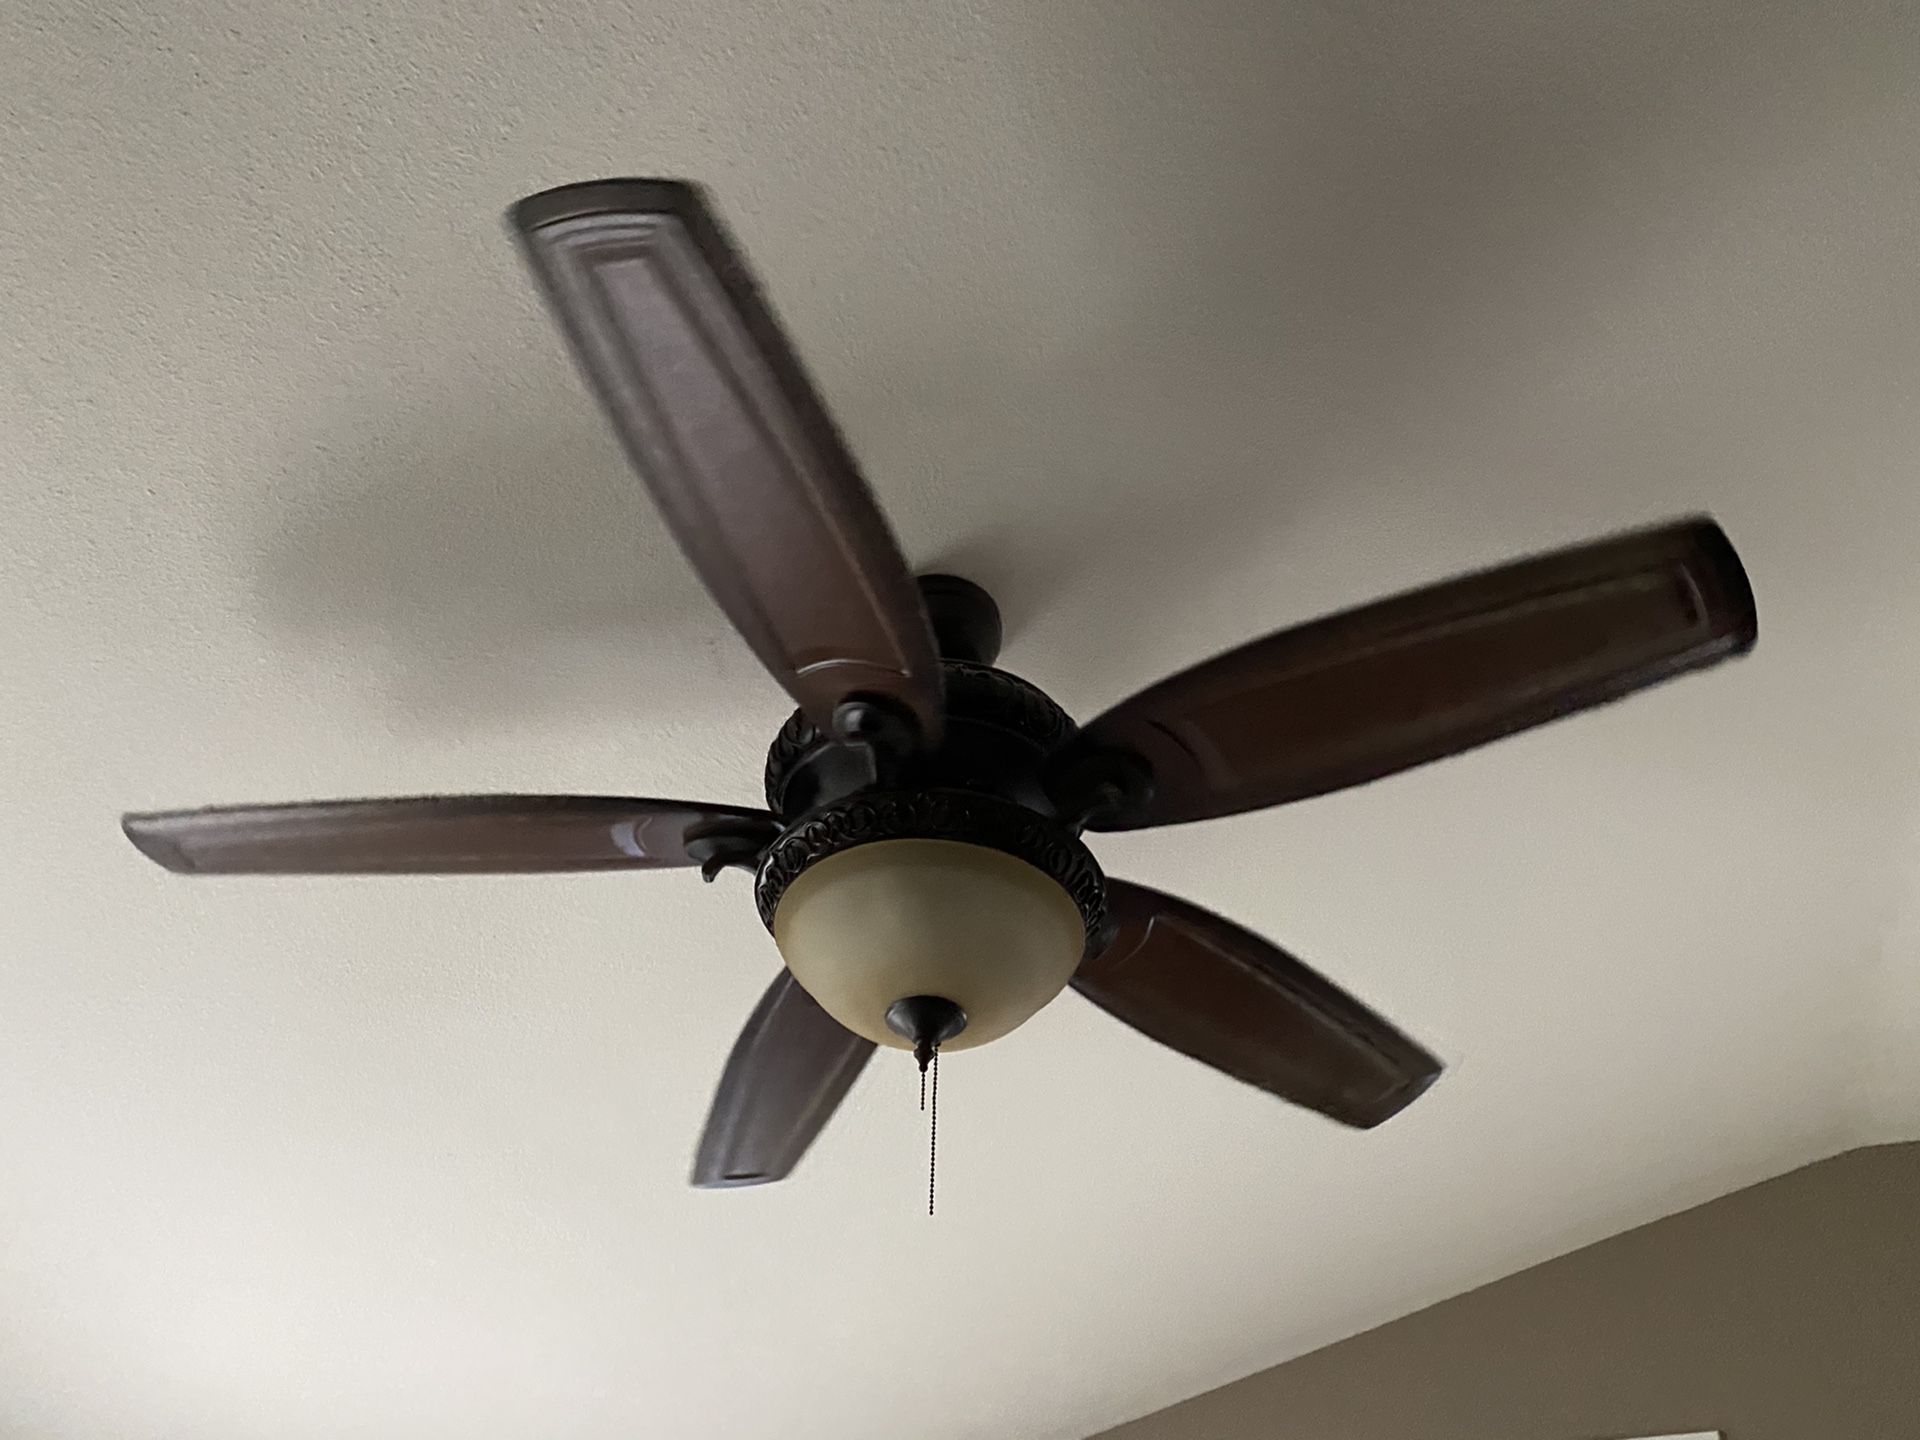 Designer master ceiling fan. Great condition works perfect 52”